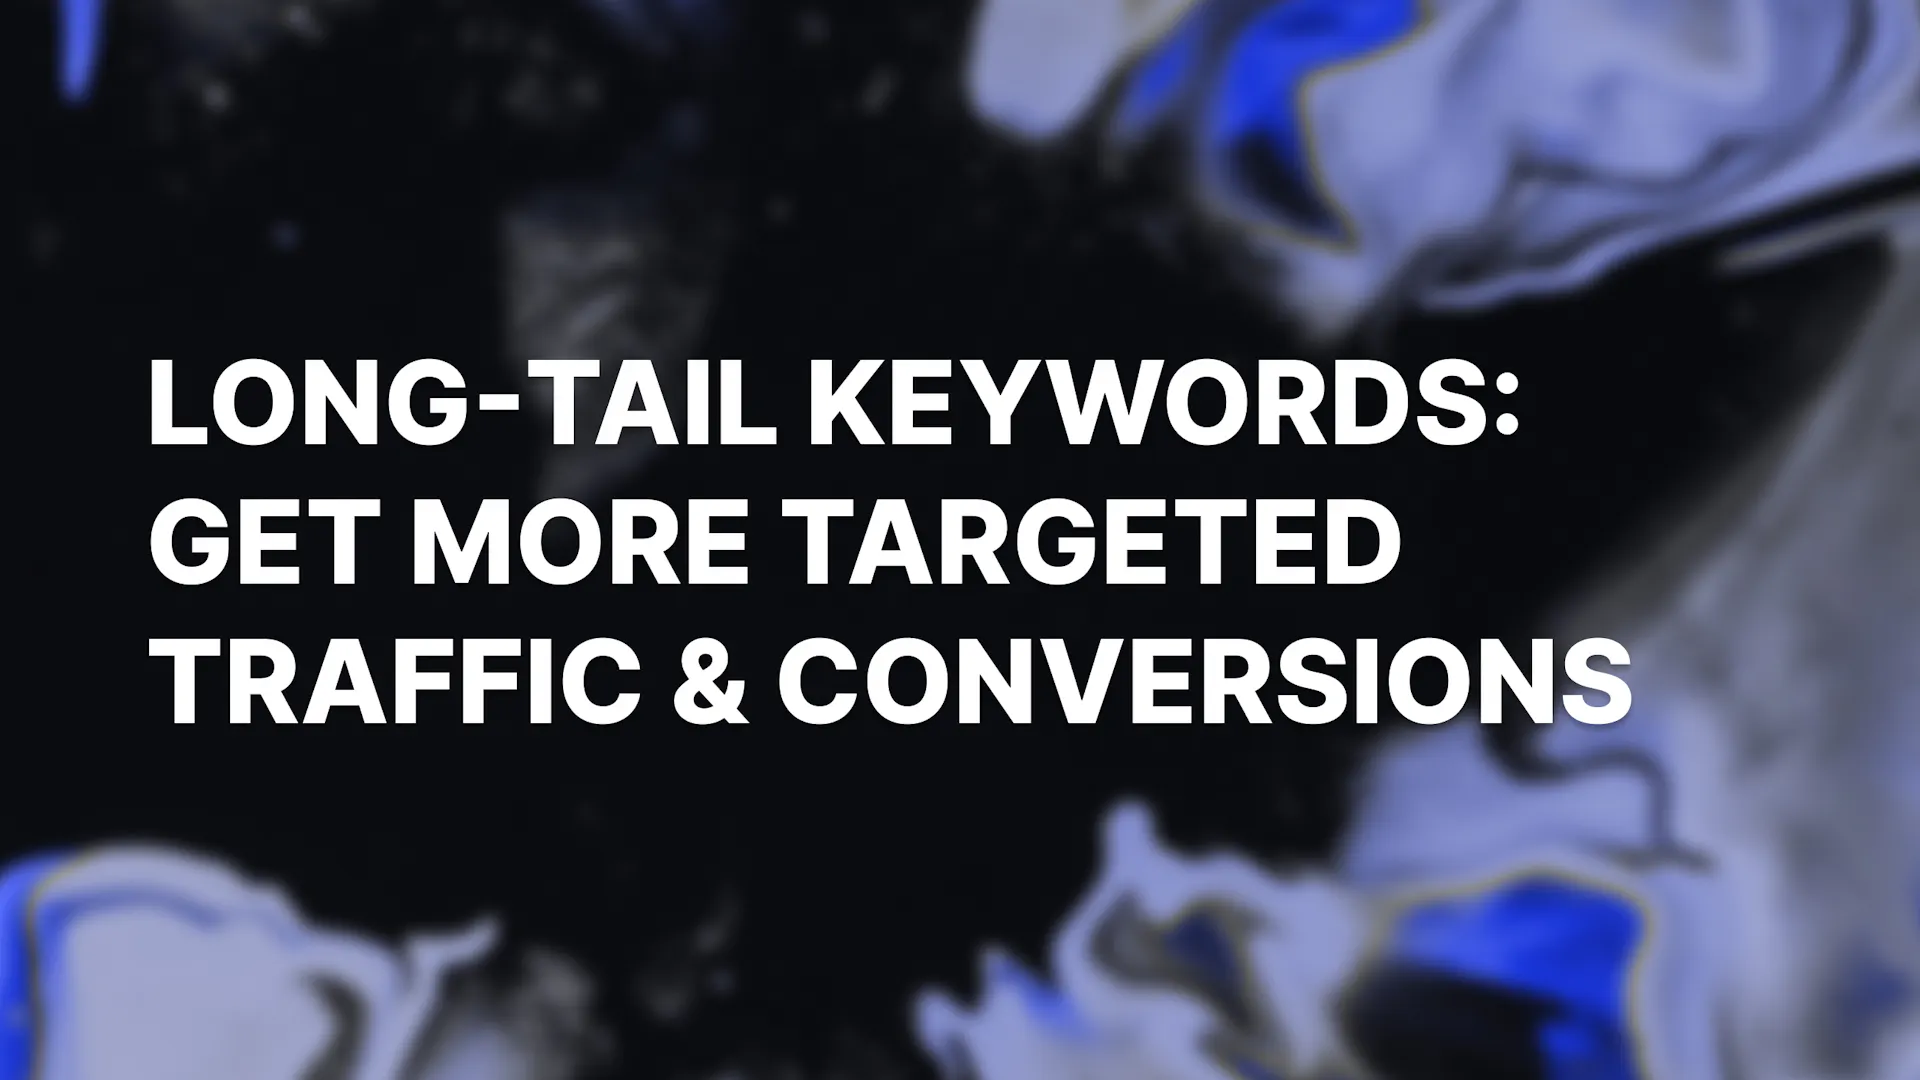 Long-Tail Keywords: Get More Targeted Traffic & Conversions